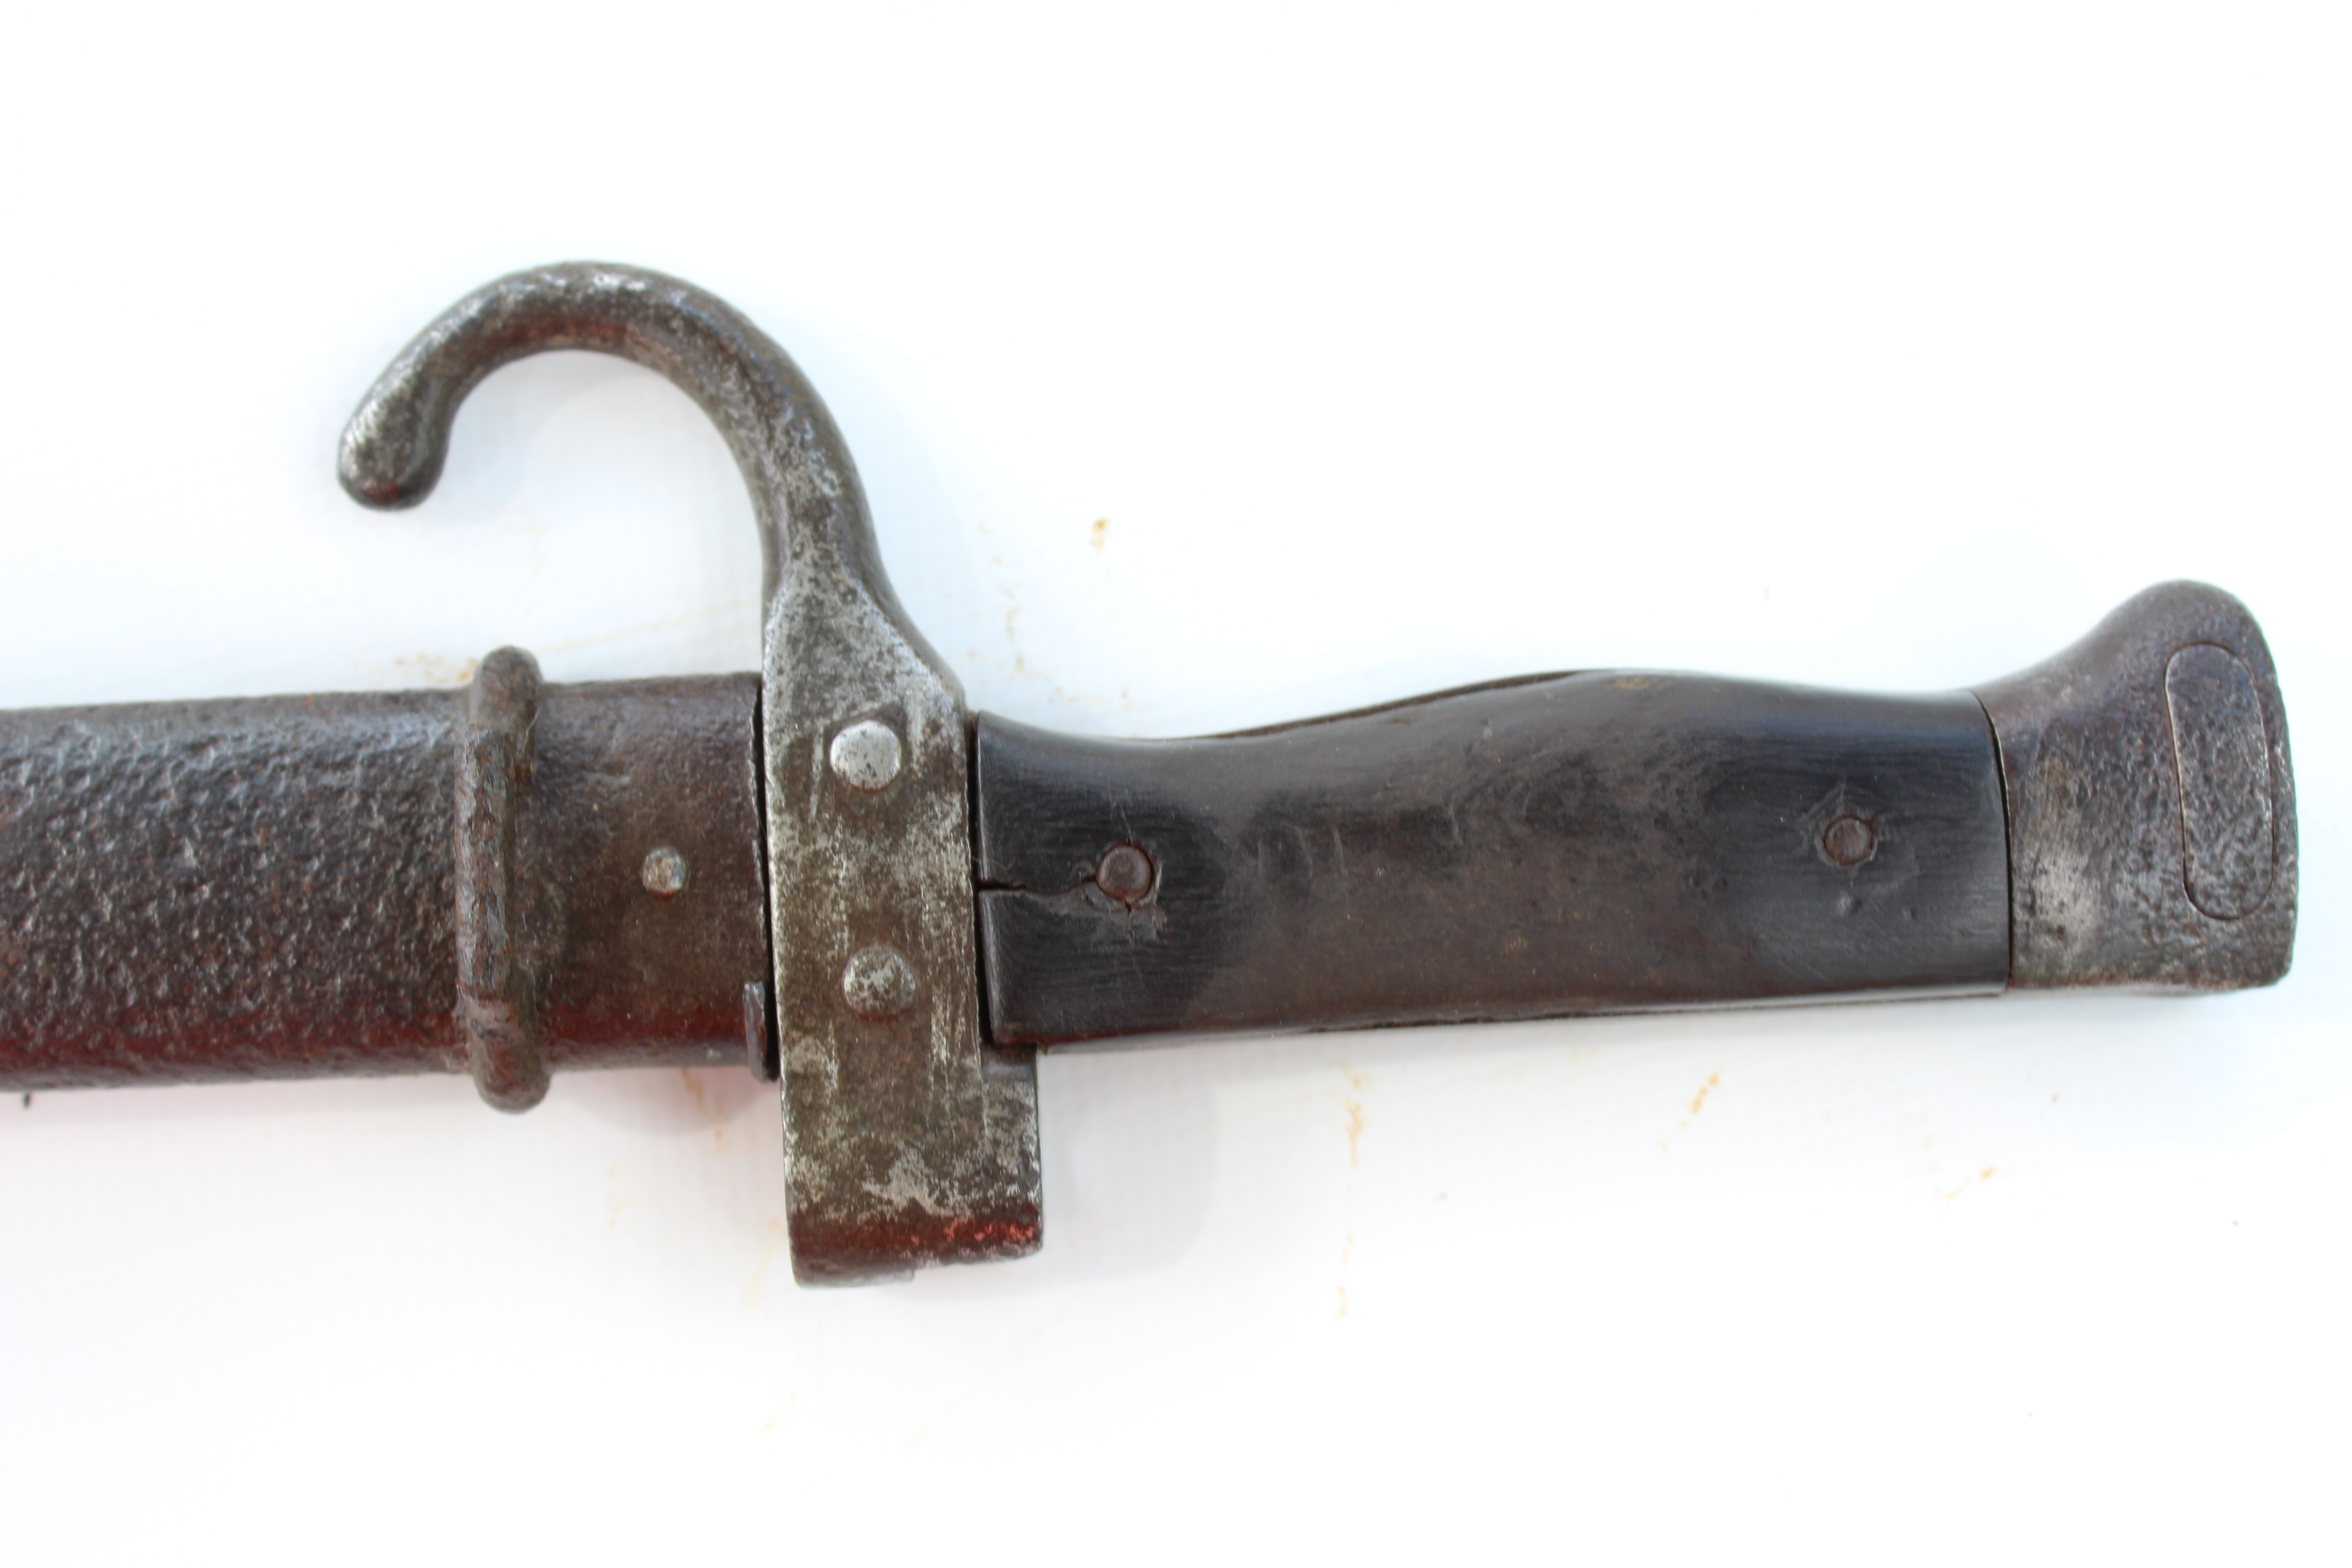 Original French Berthier bayonet model pitted and with signs wear 1892, from of